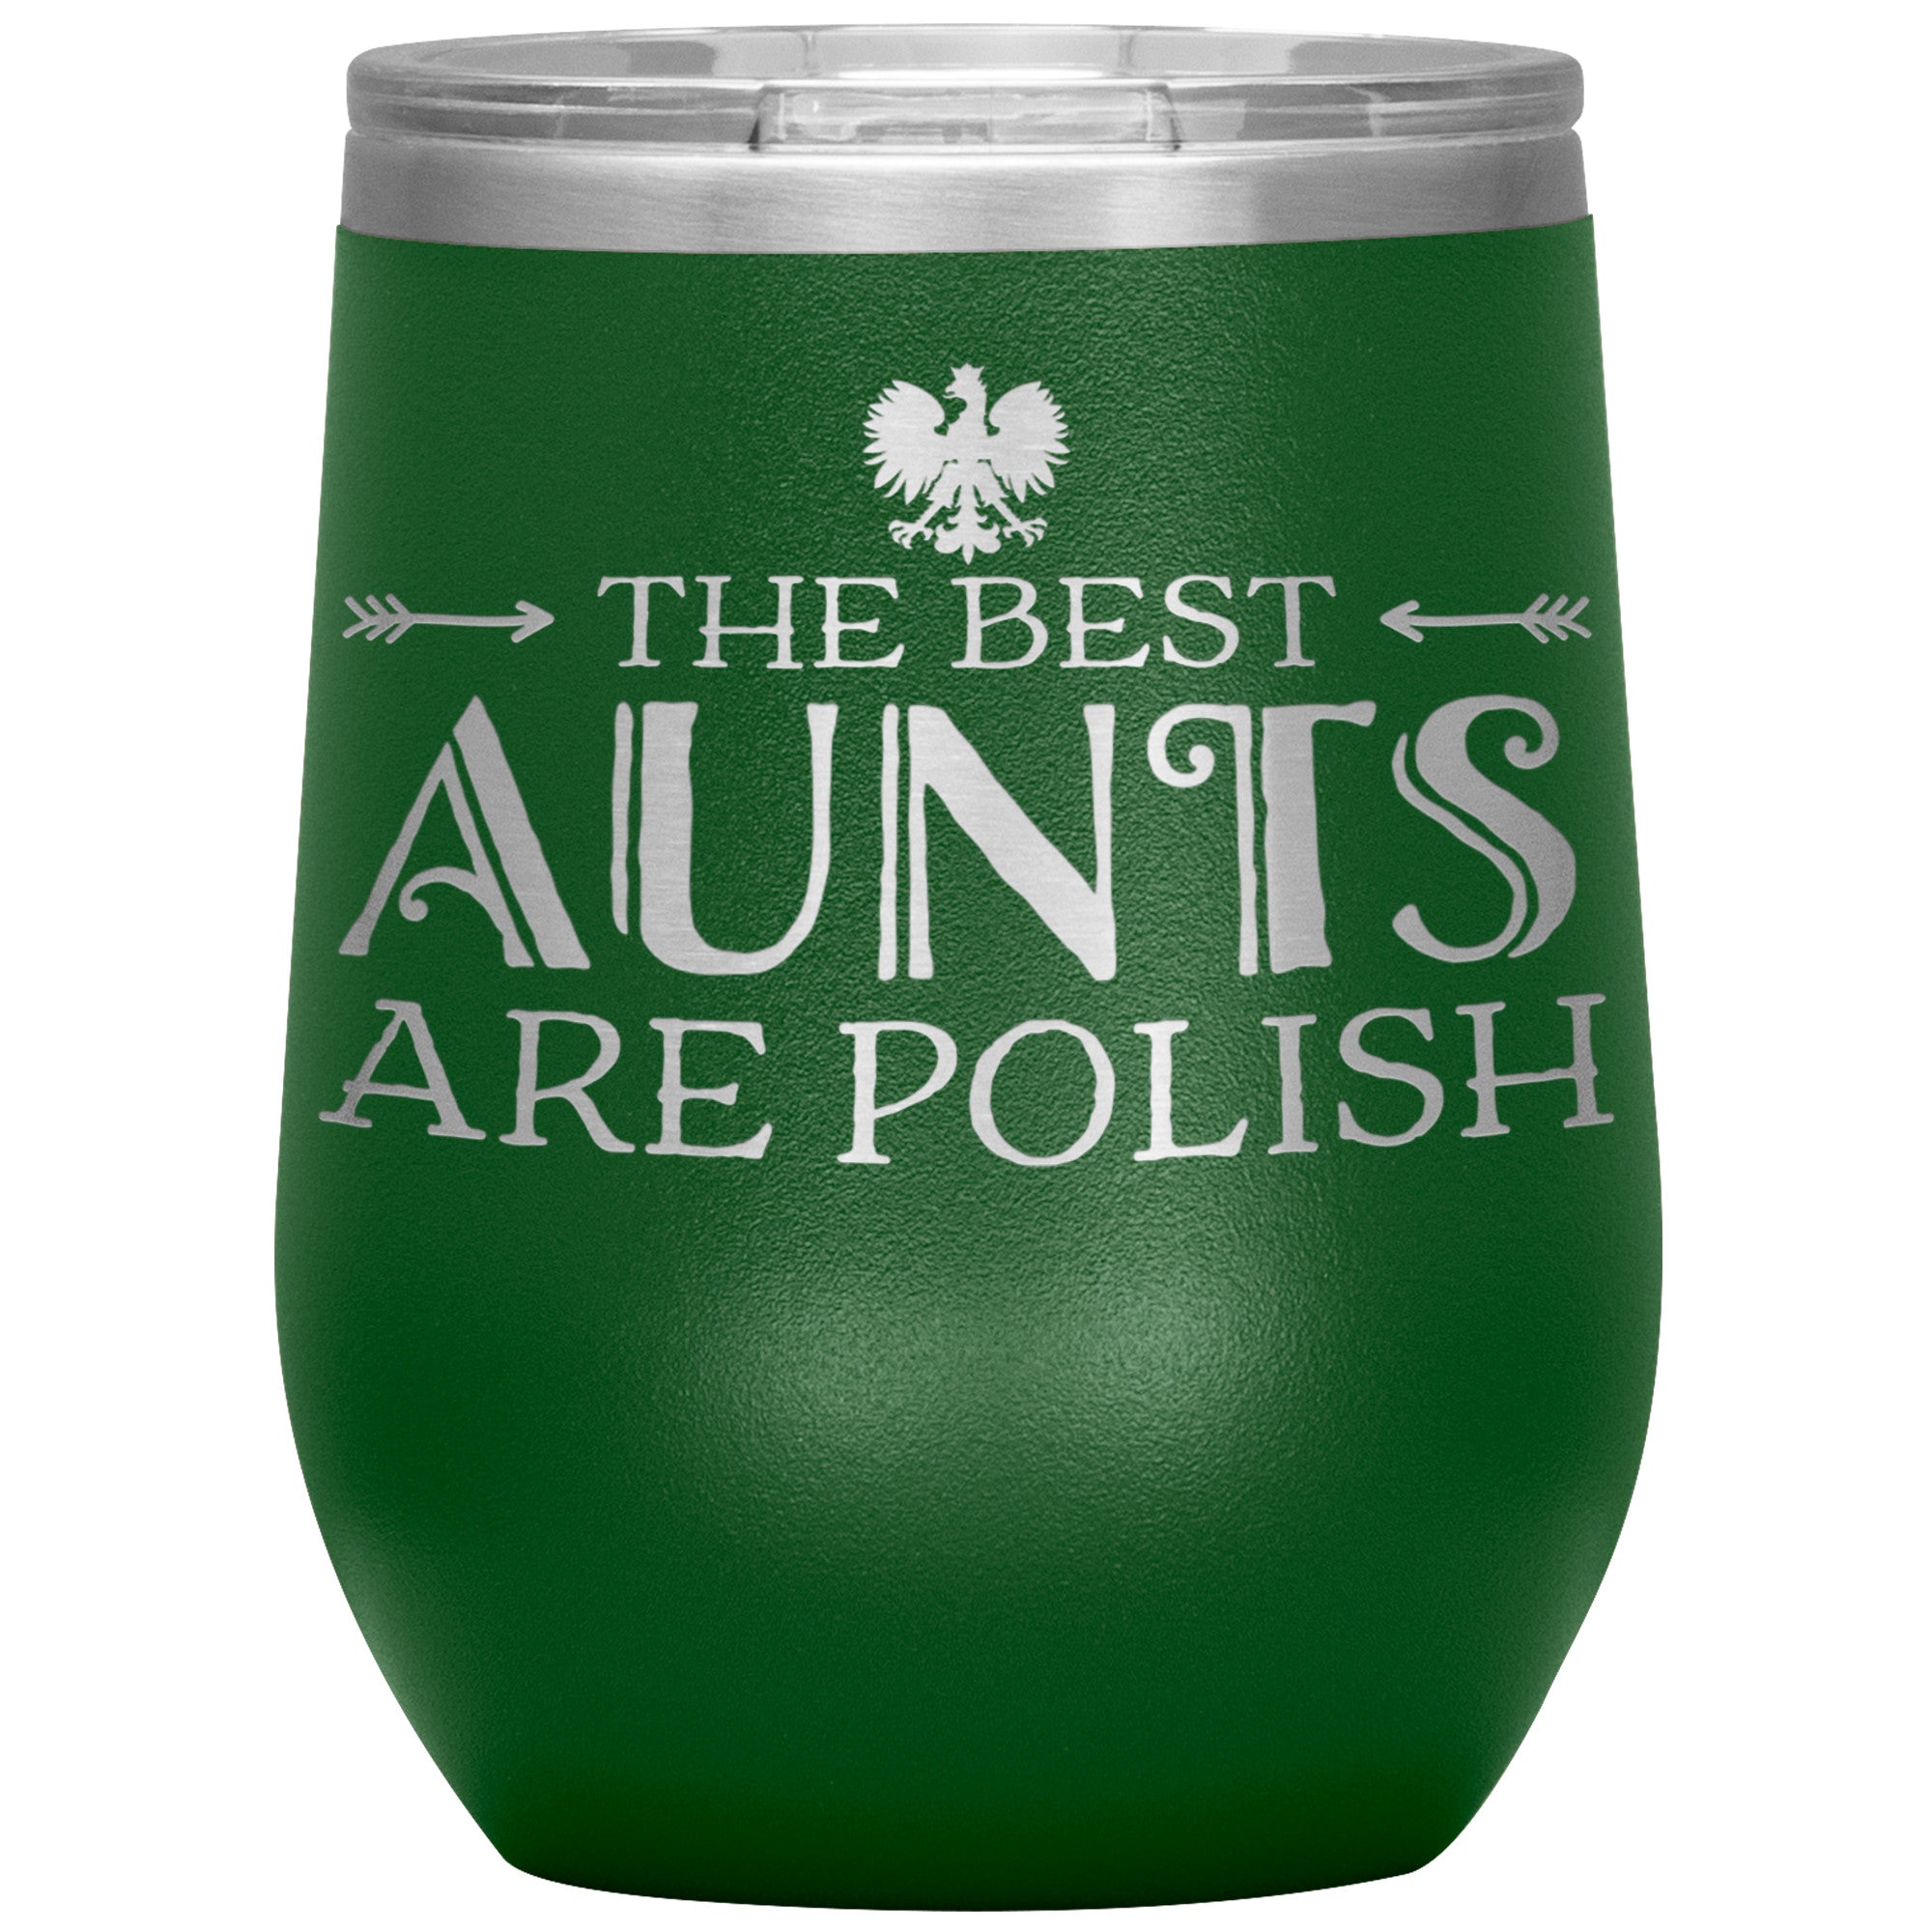 The Best Aunts Are Polish Insulated Wine Tumbler Tumblers teelaunch Green  